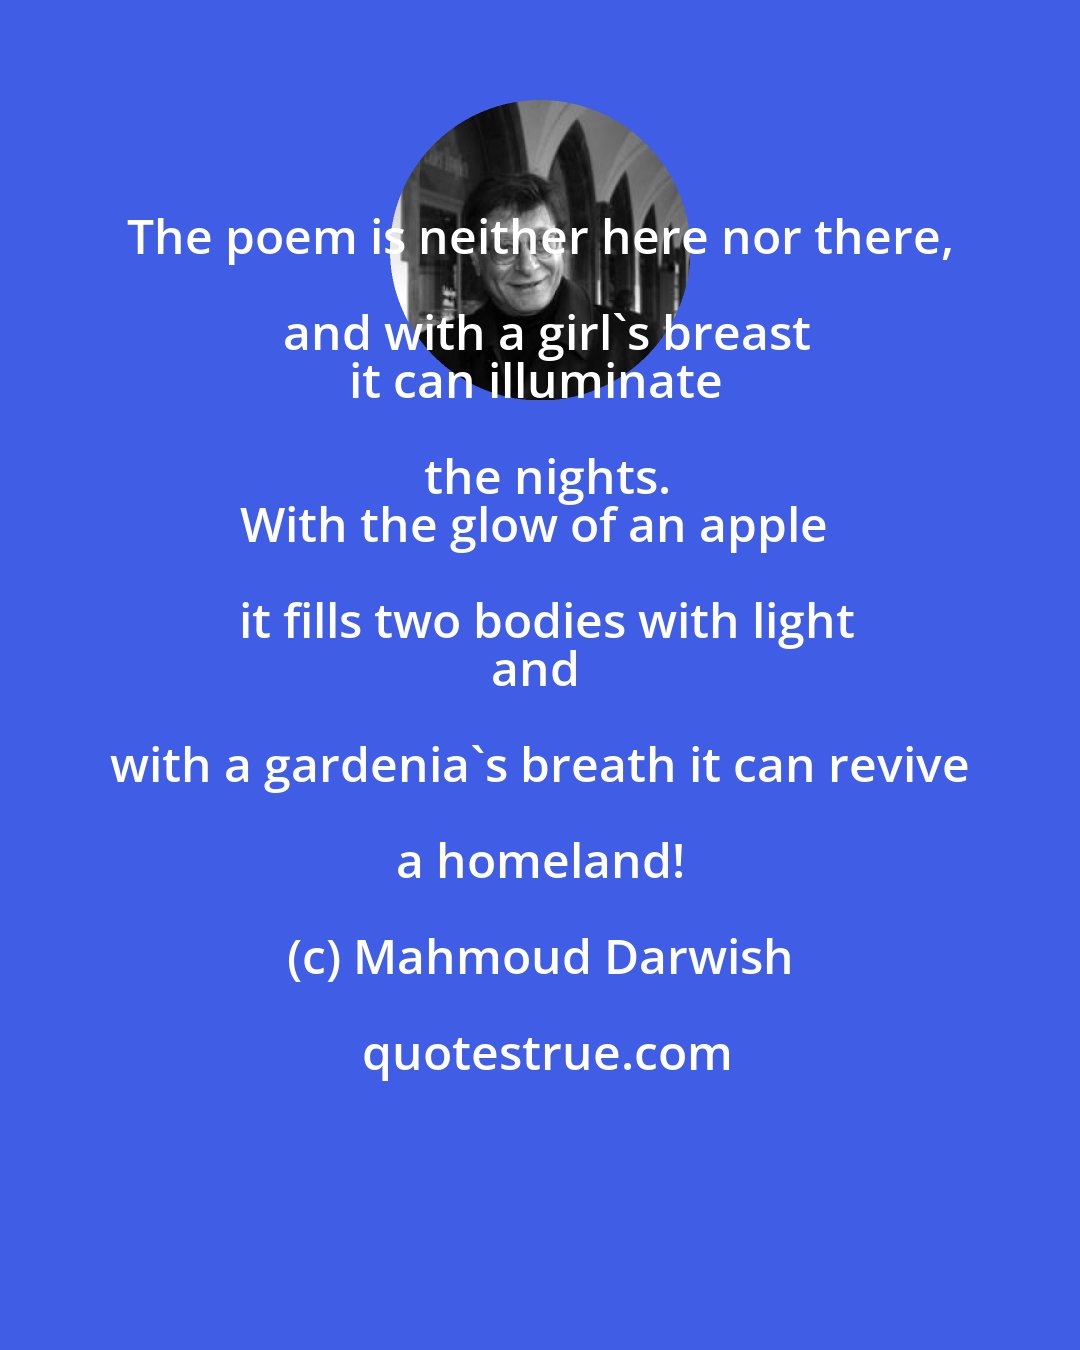 Mahmoud Darwish: The poem is neither here nor there, and with a girl's breast
it can illuminate the nights.
With the glow of an apple it fills two bodies with light
and with a gardenia's breath it can revive a homeland!